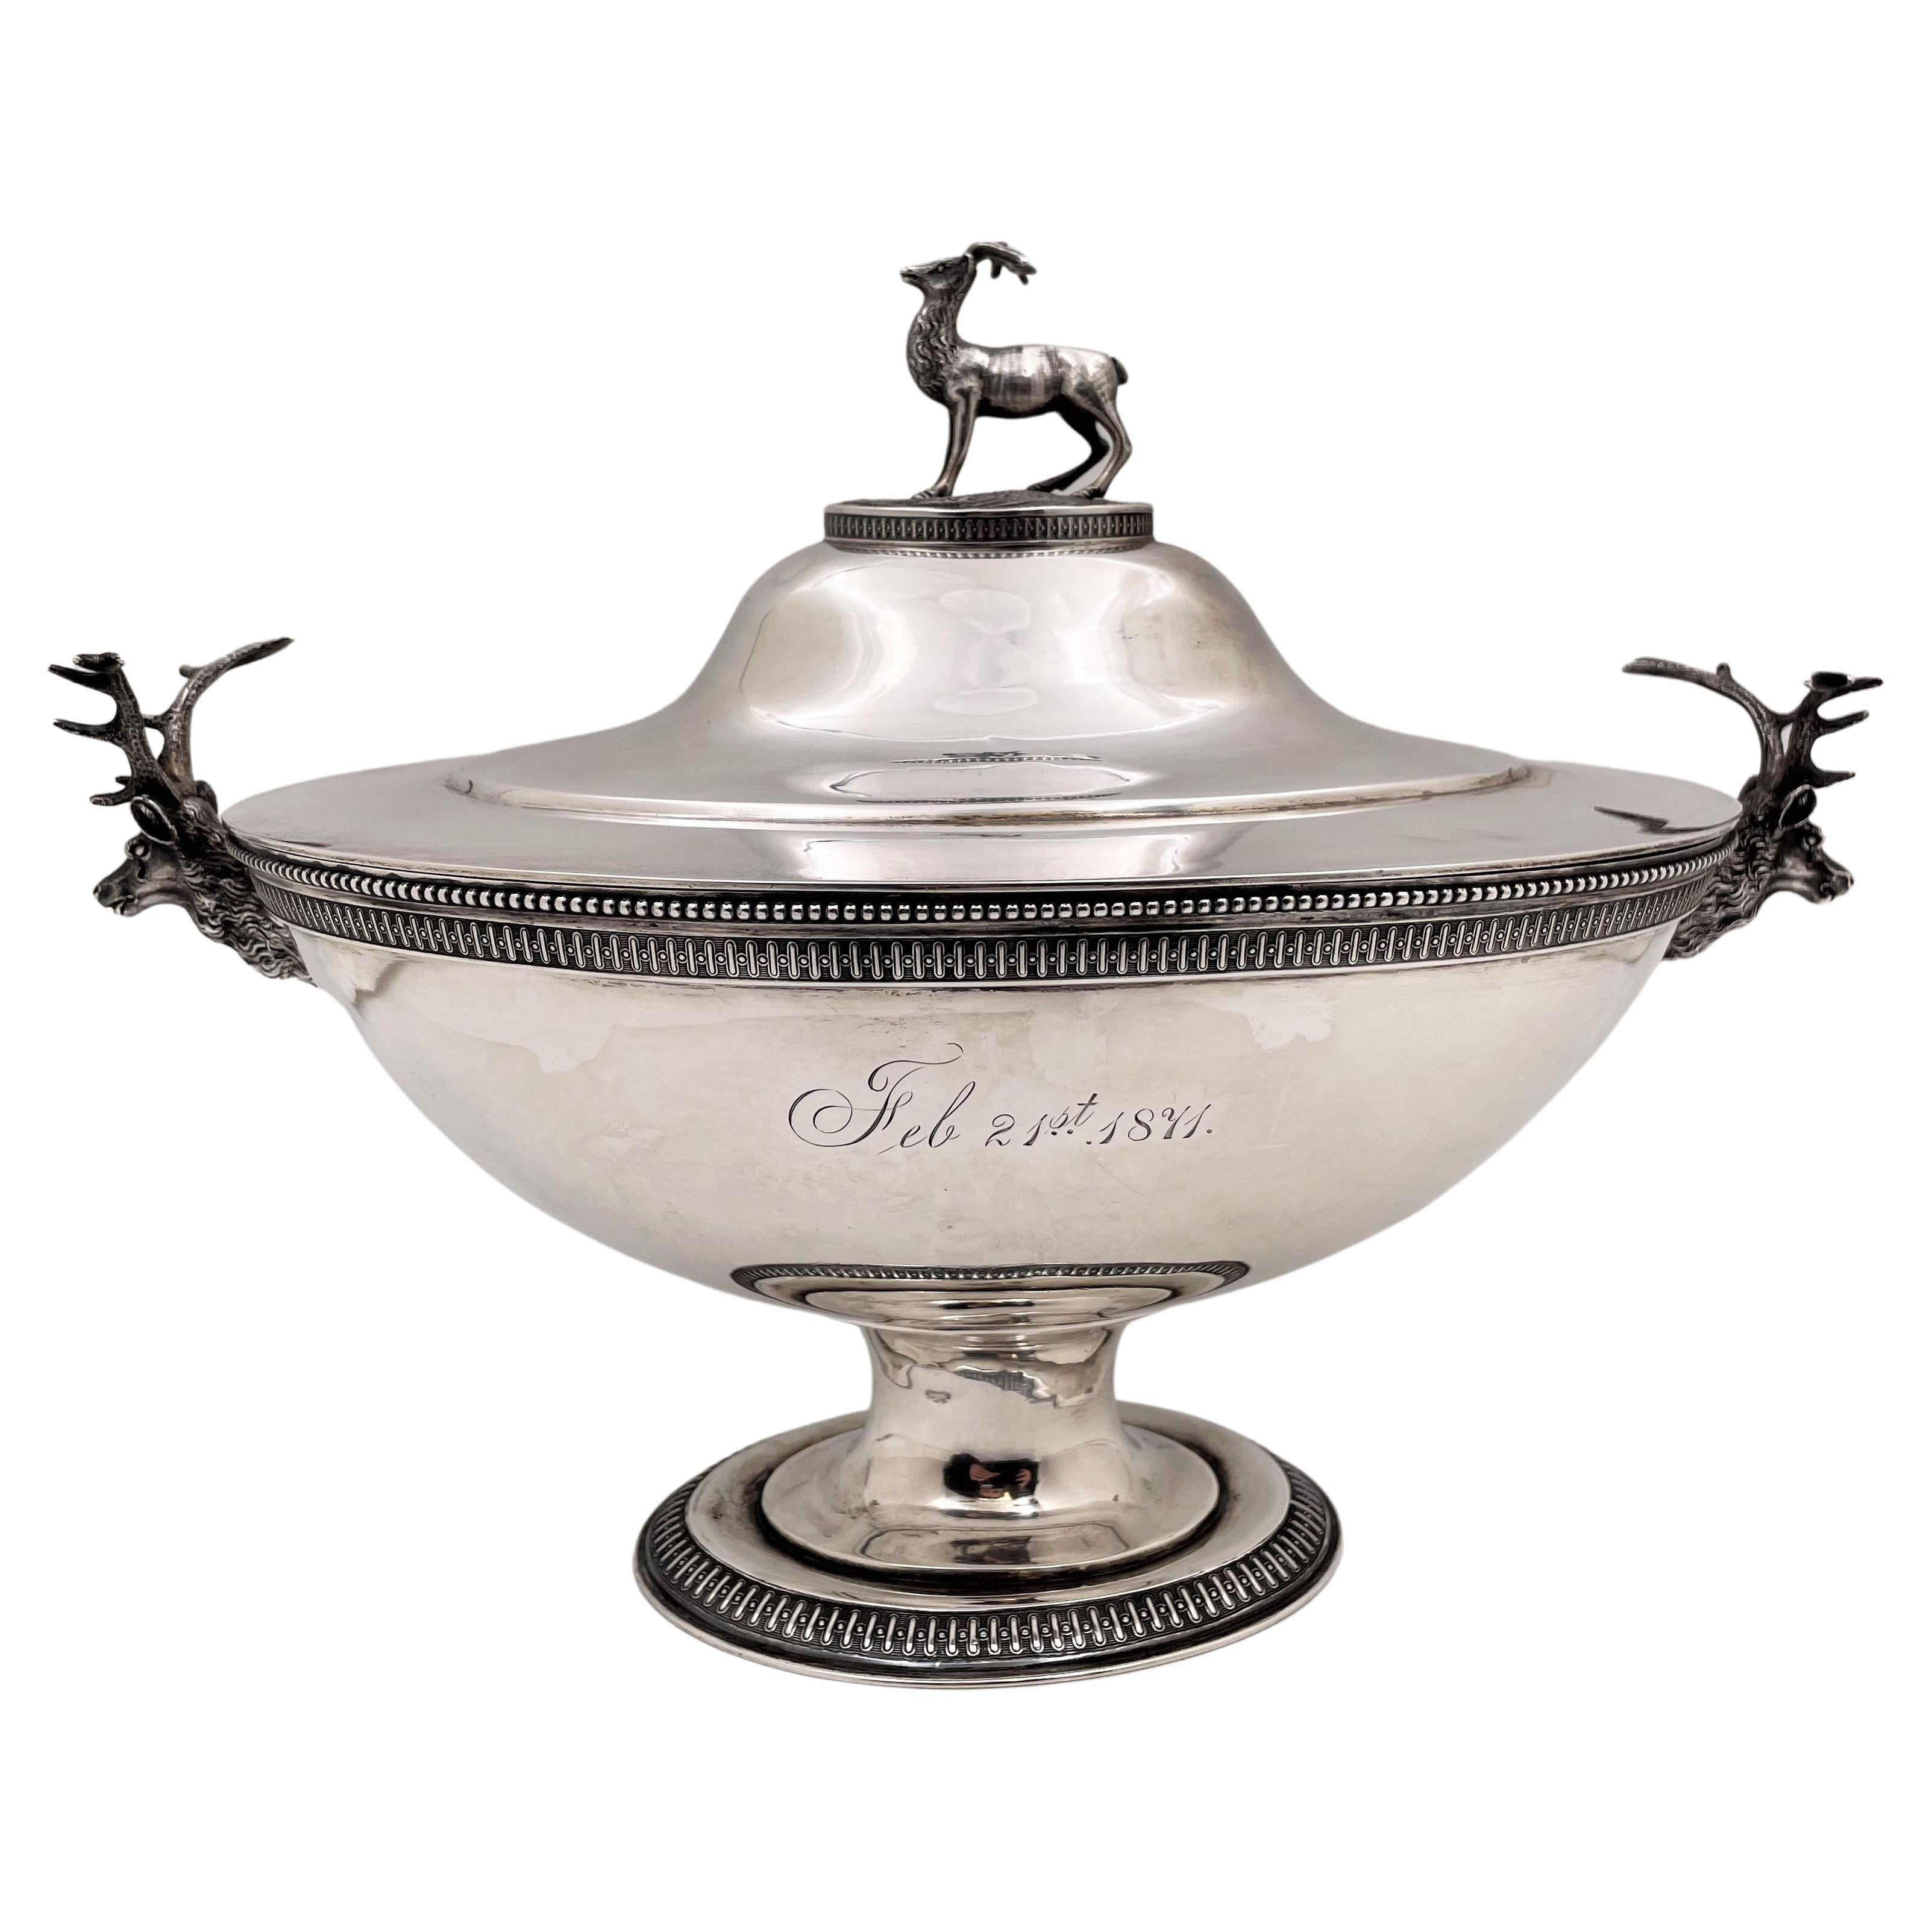 Ford & Tupper 1871 Sterling Silver Stag Tureen with Deer Animal Motifs